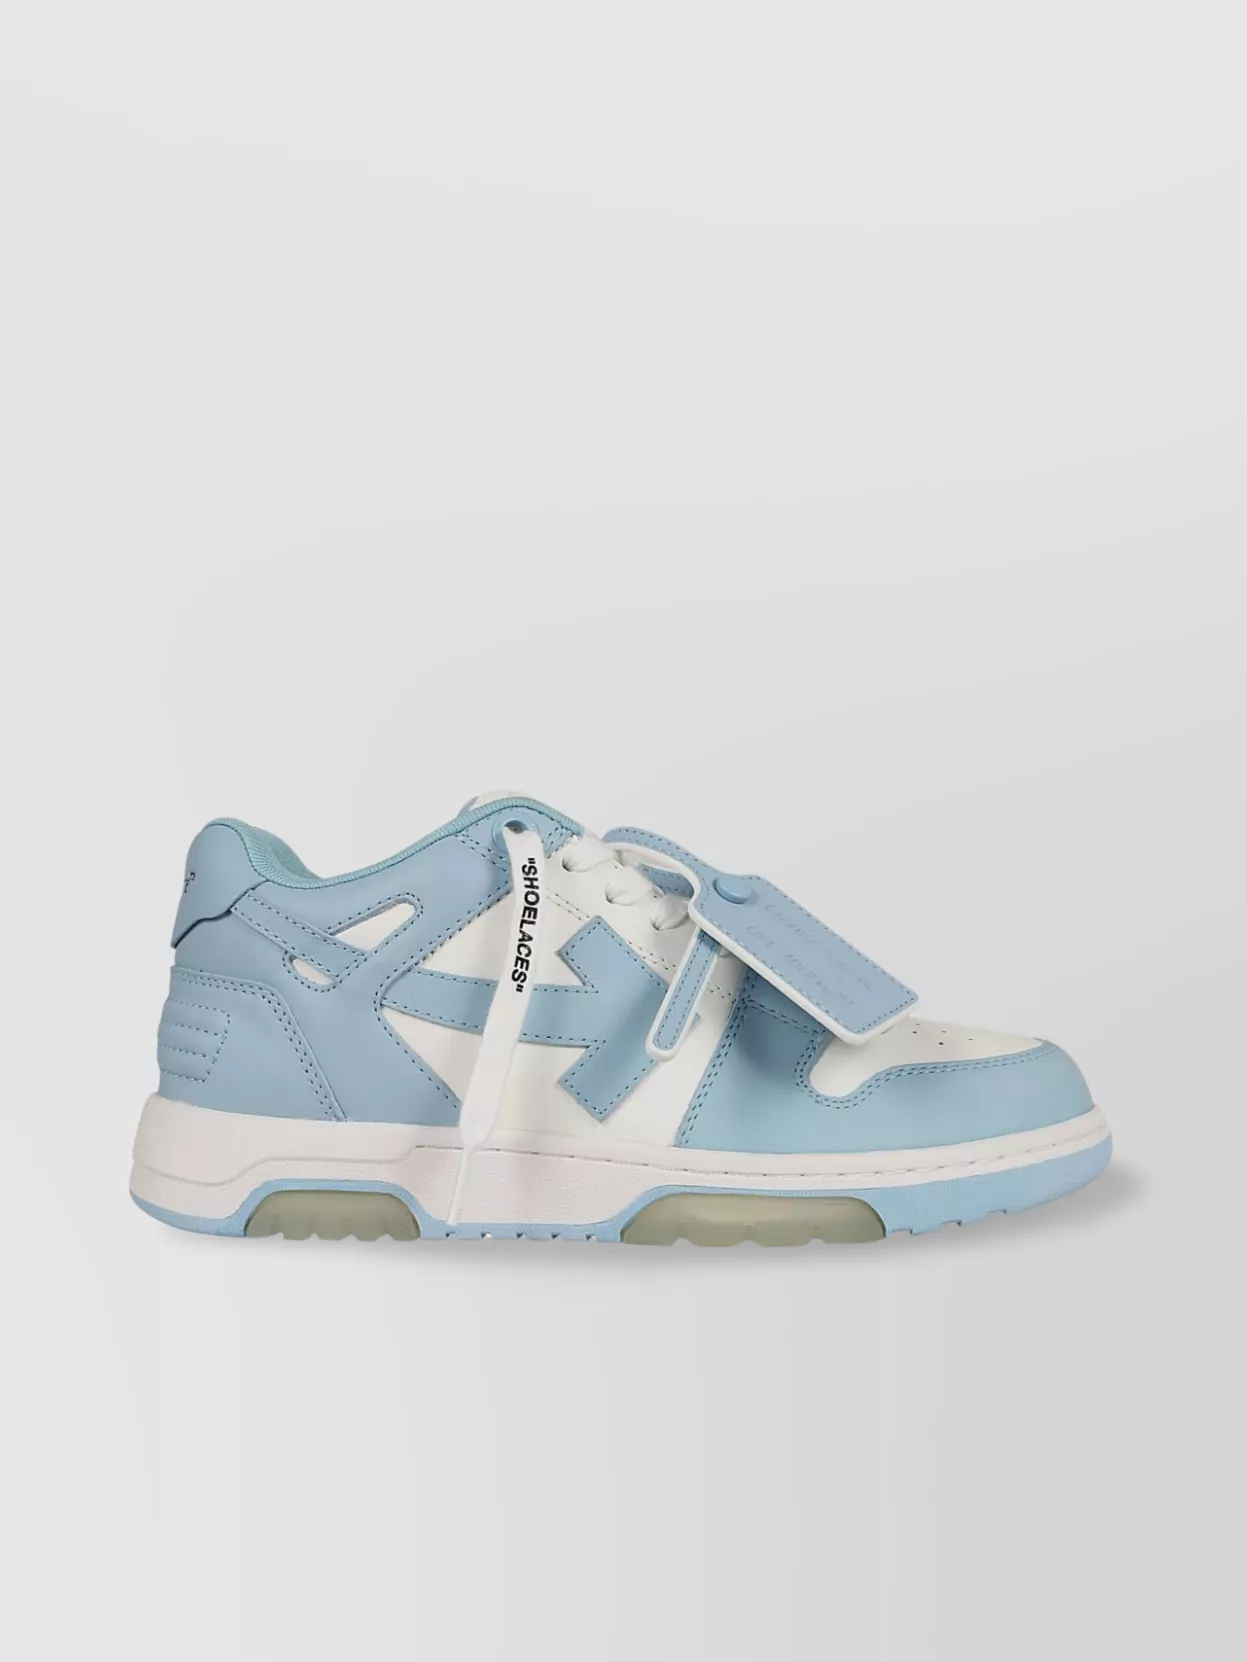 OFF-WHITE LEATHER SNEAKERS WITH CONTRAST SOLE AND PADDED COLLAR